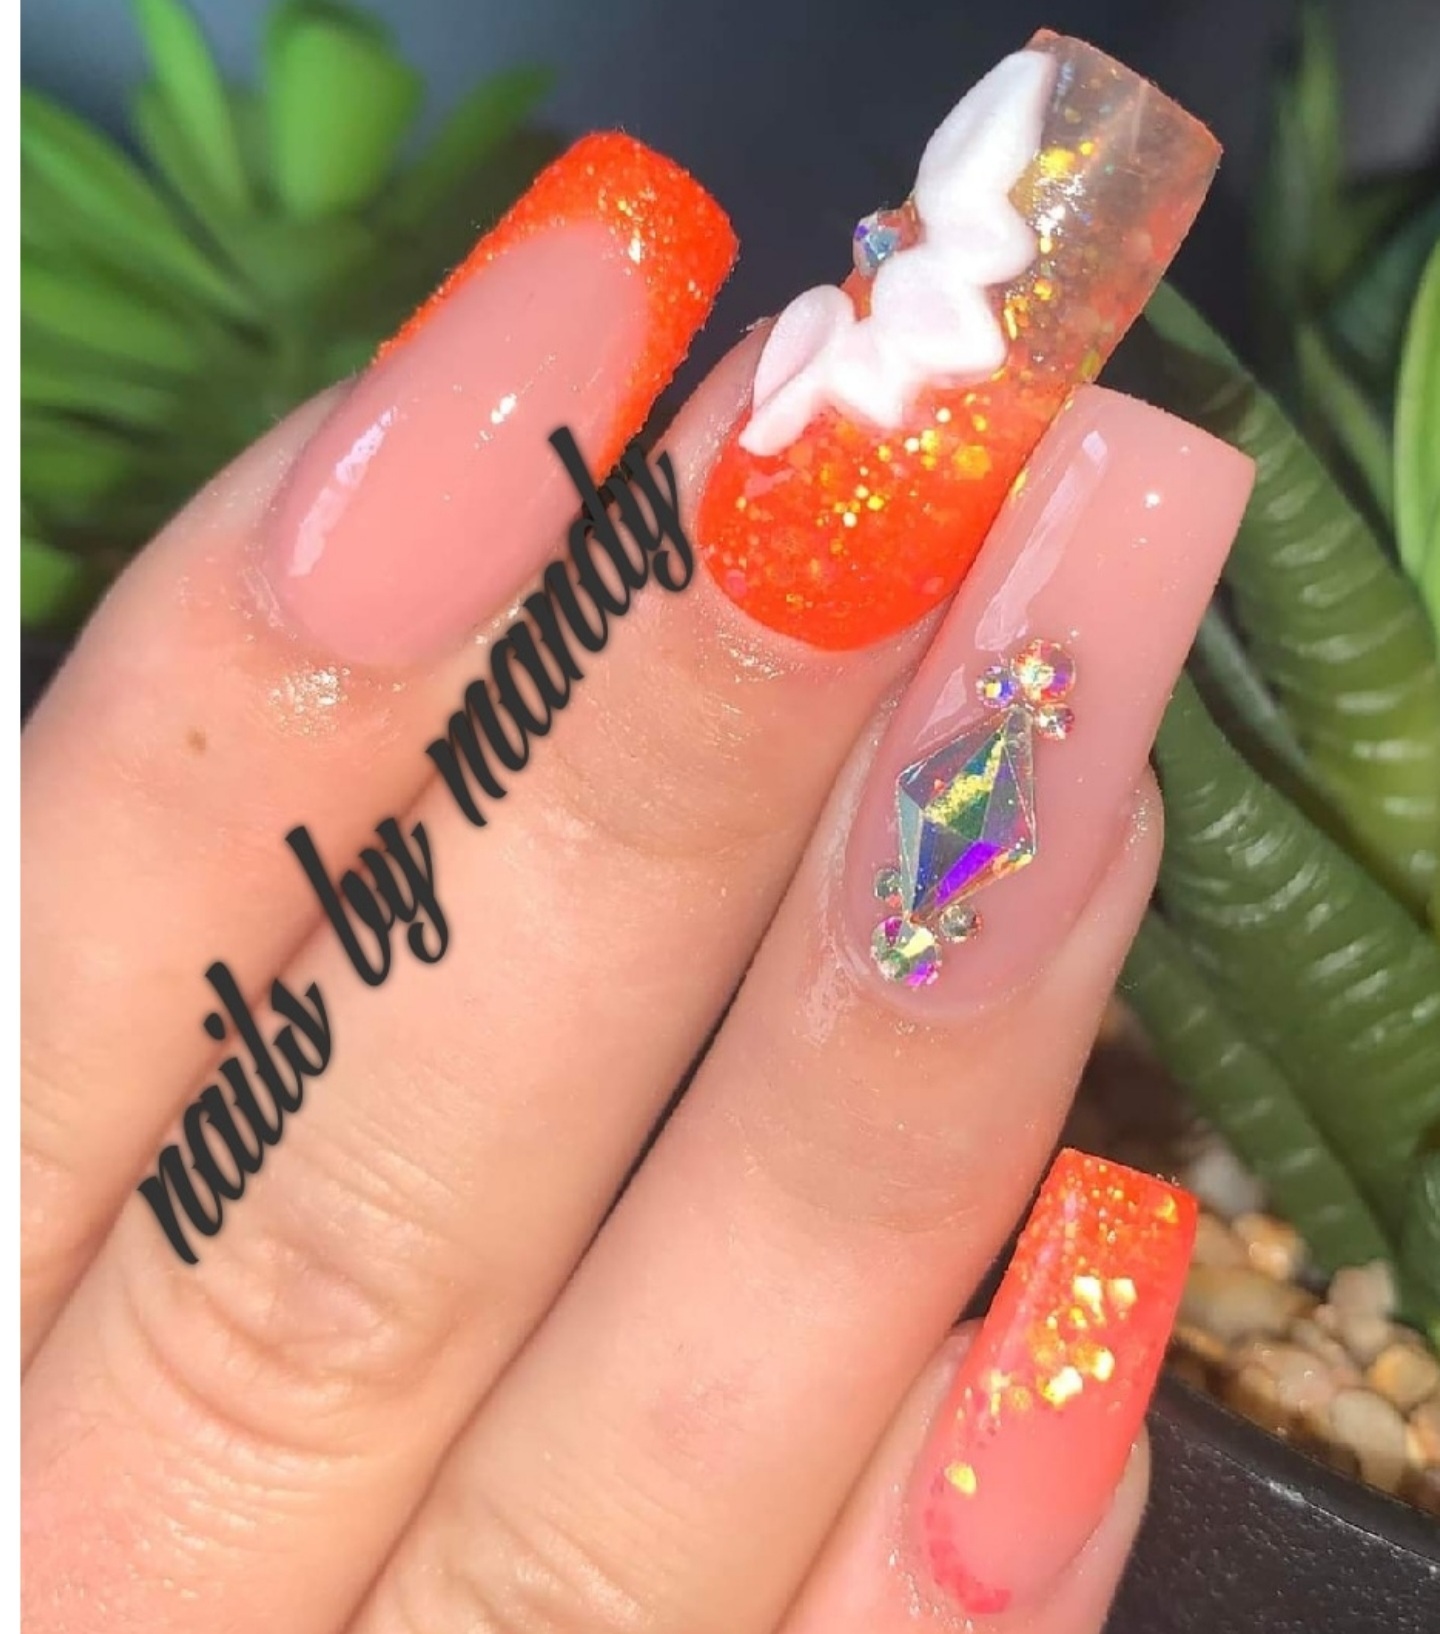 Amanda loves getting creating with clients nails